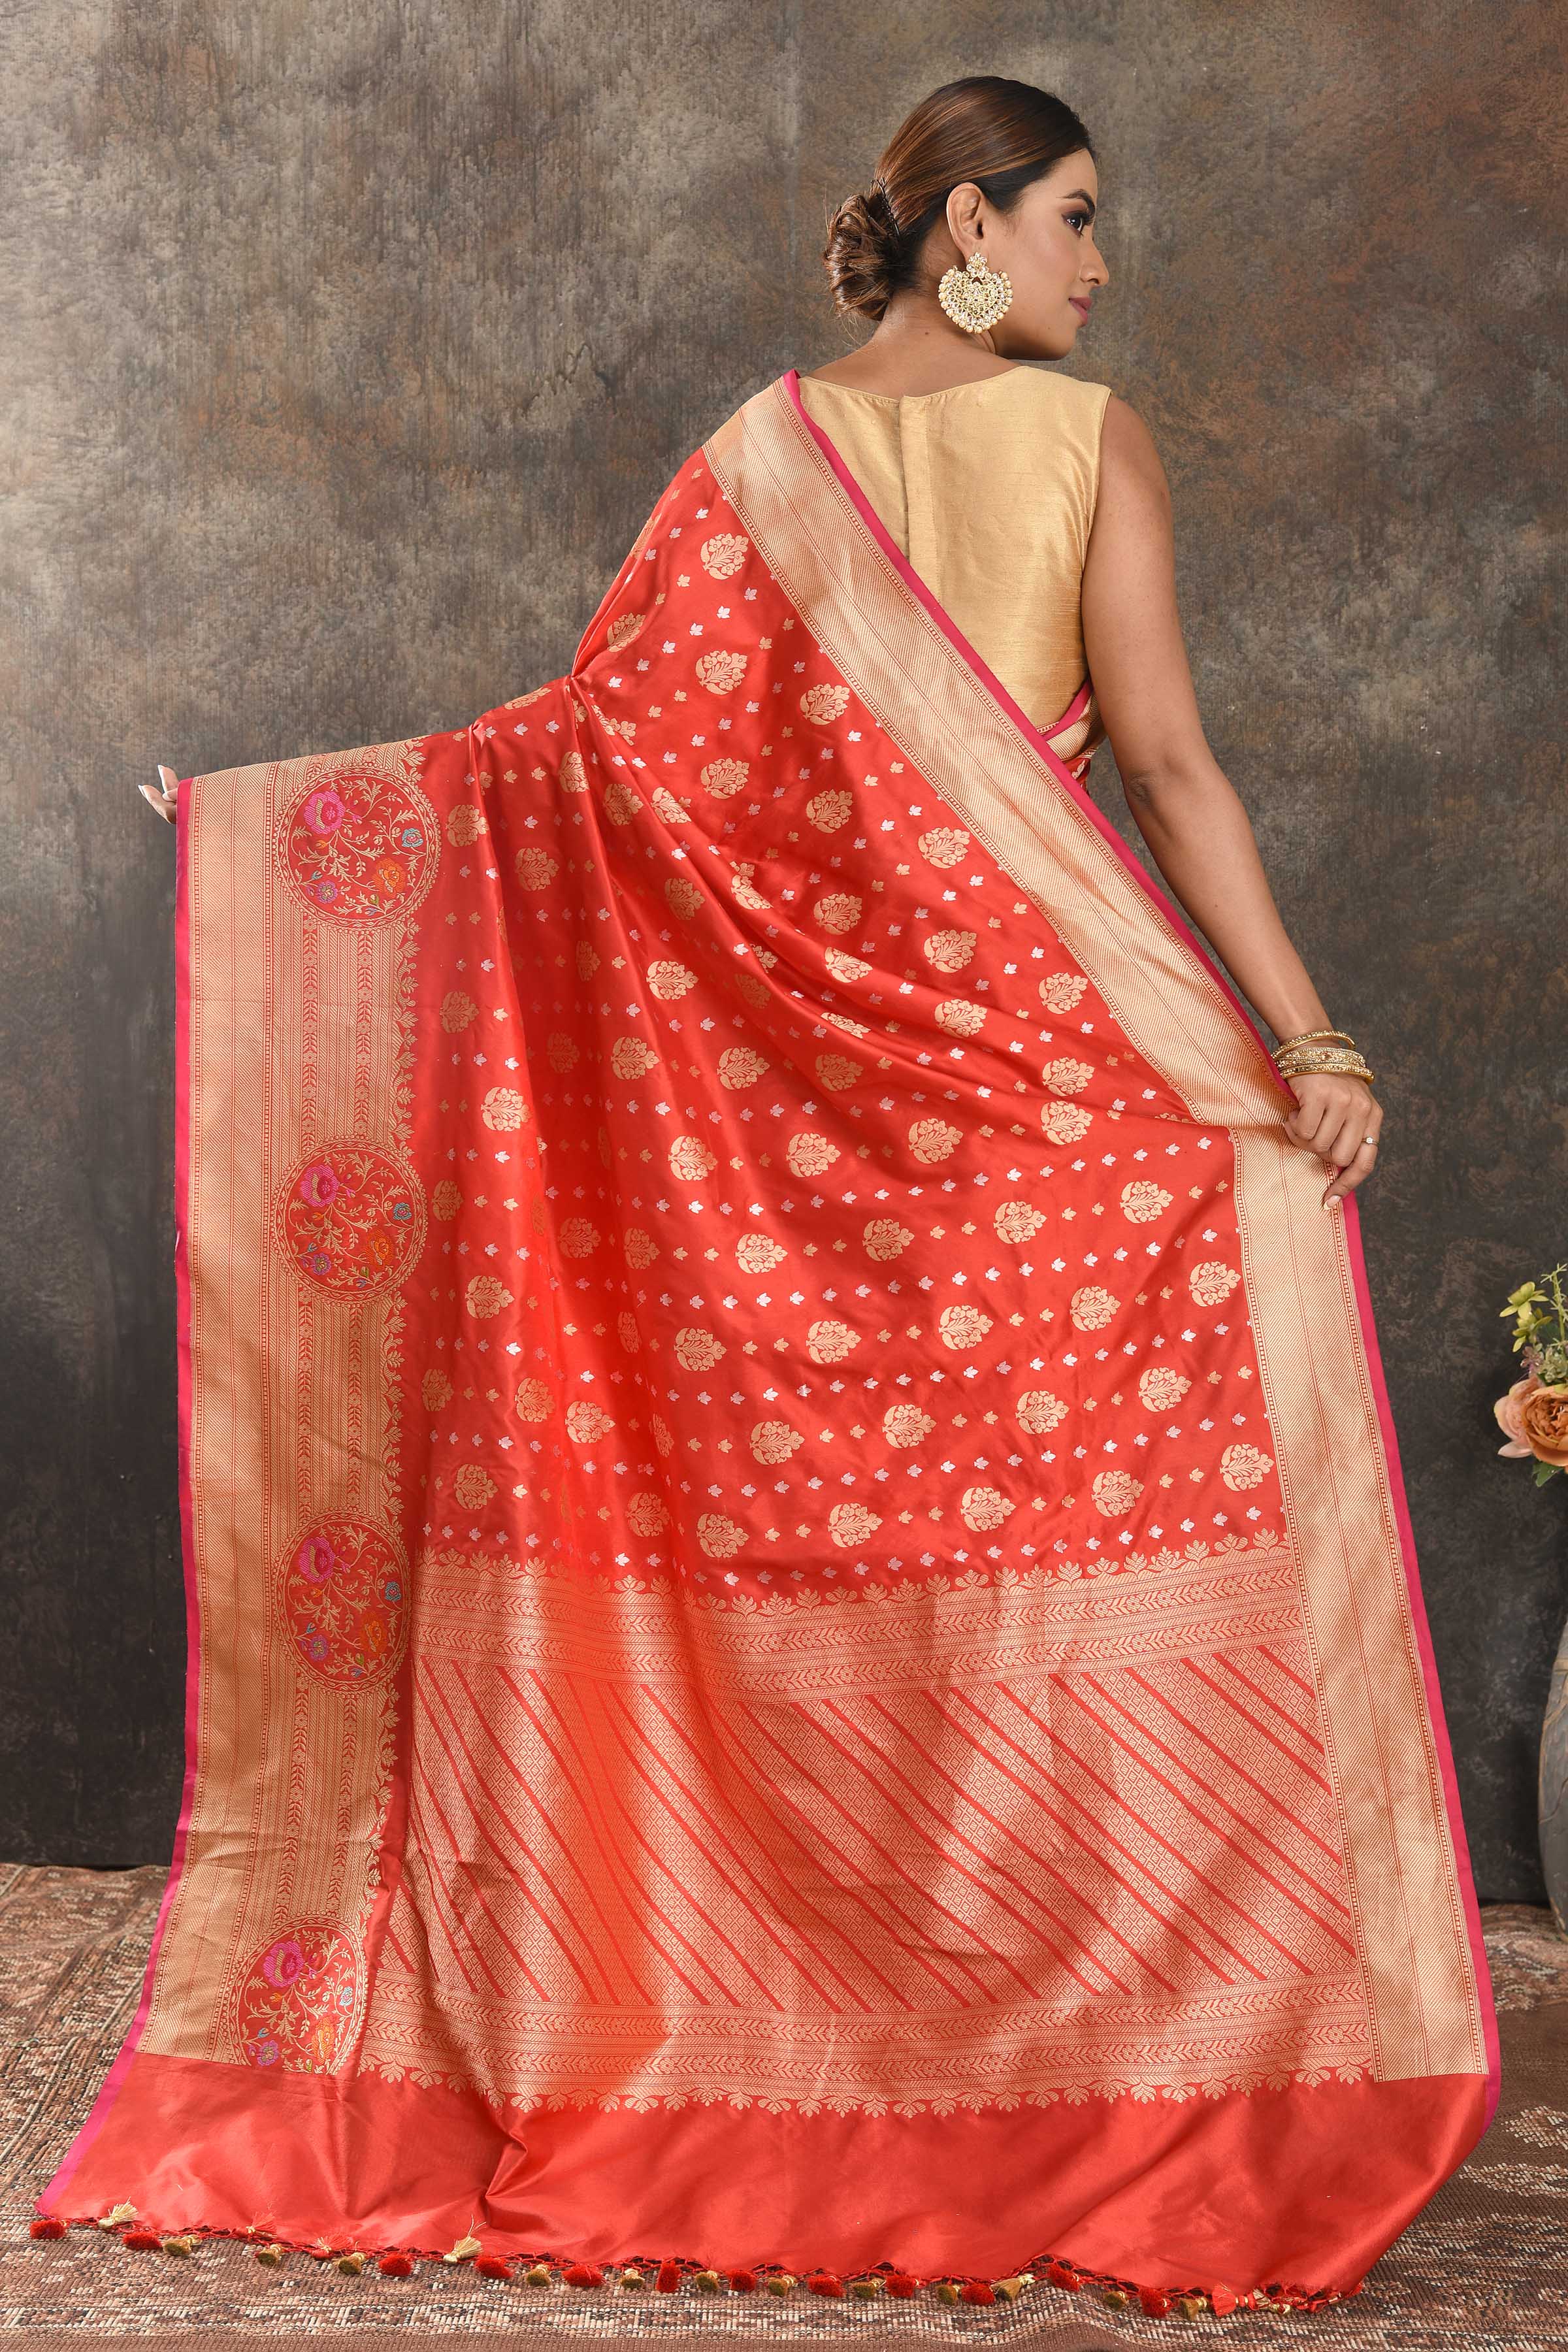 Buy red fancy Katan silk saree online in USA with overall zari buta and border. Be the center of attraction on special occasions in ethnic sarees, designer sarees, embroidered sarees, handwoven sarees, pure silk sarees from Pure Elegance Indian saree store in USA.-back